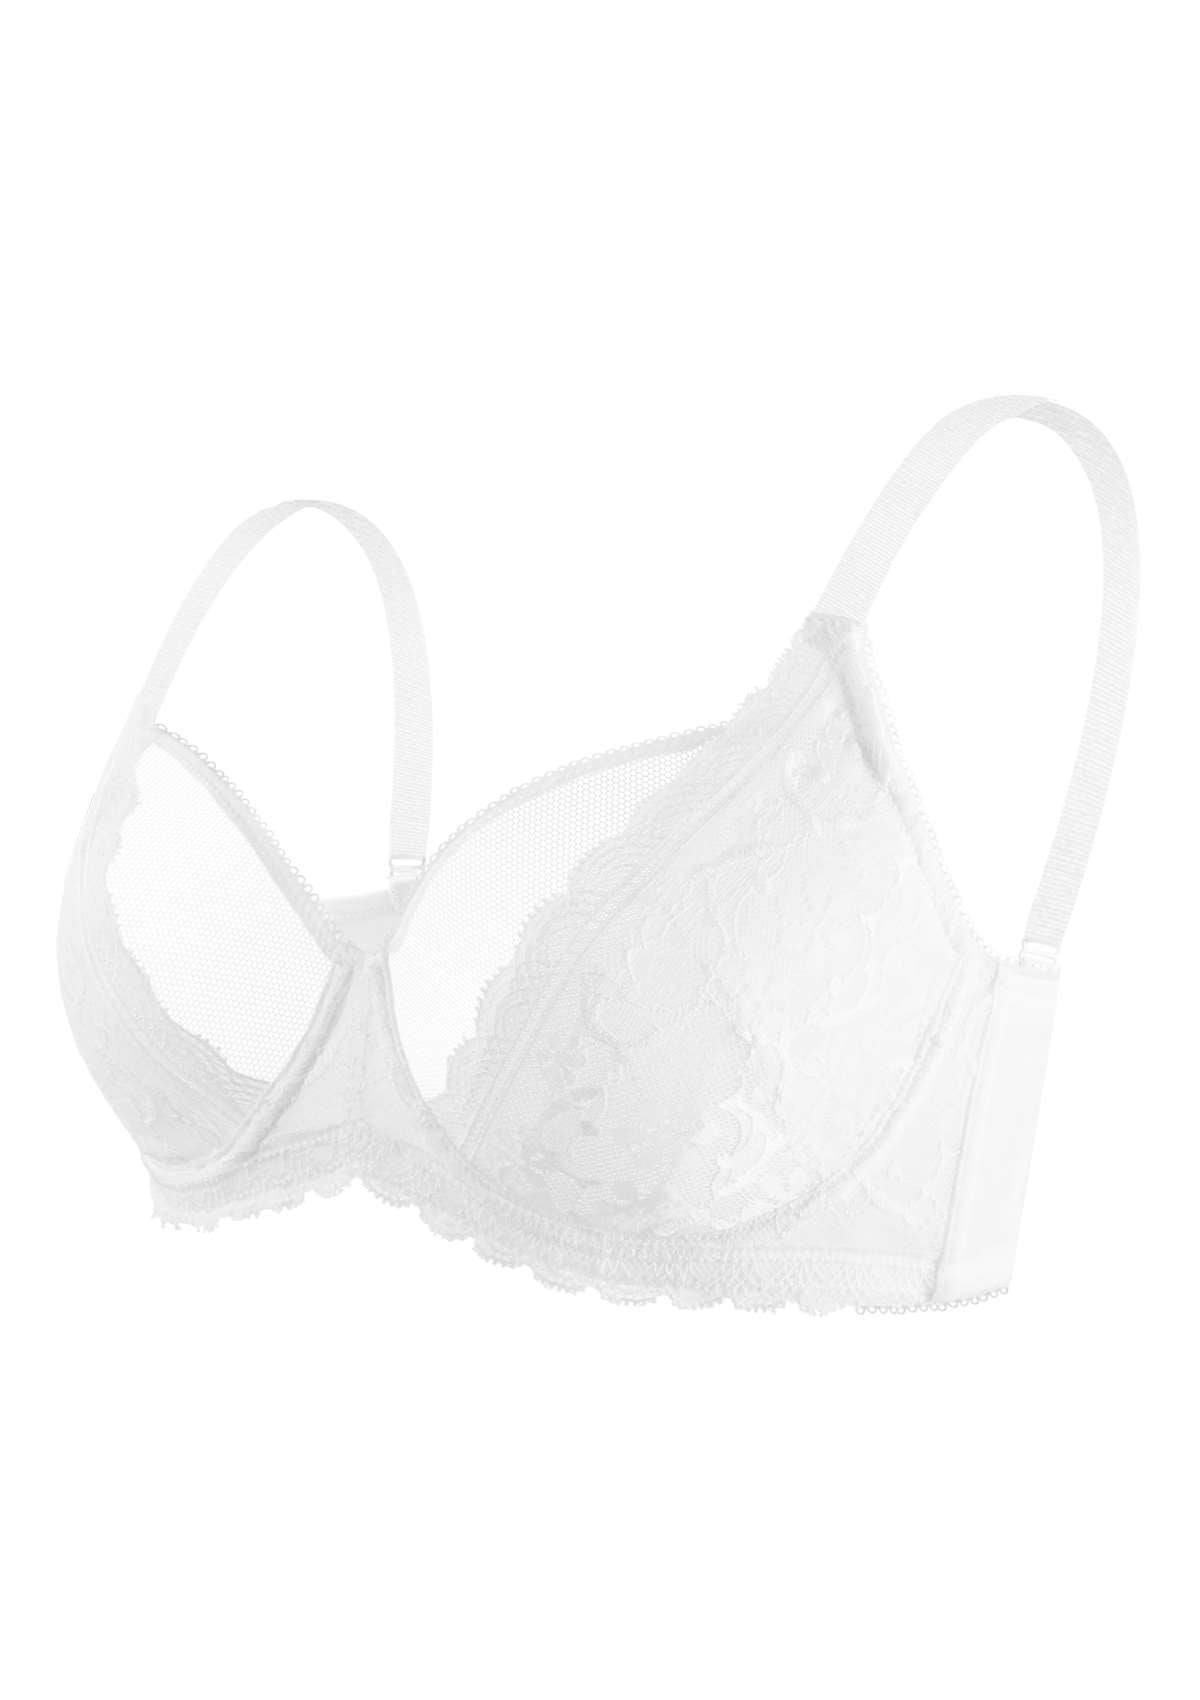 HSIA Anemone Big Bra: Best Bra For Lift And Support, Floral Bra - White / 34 / DDD/F